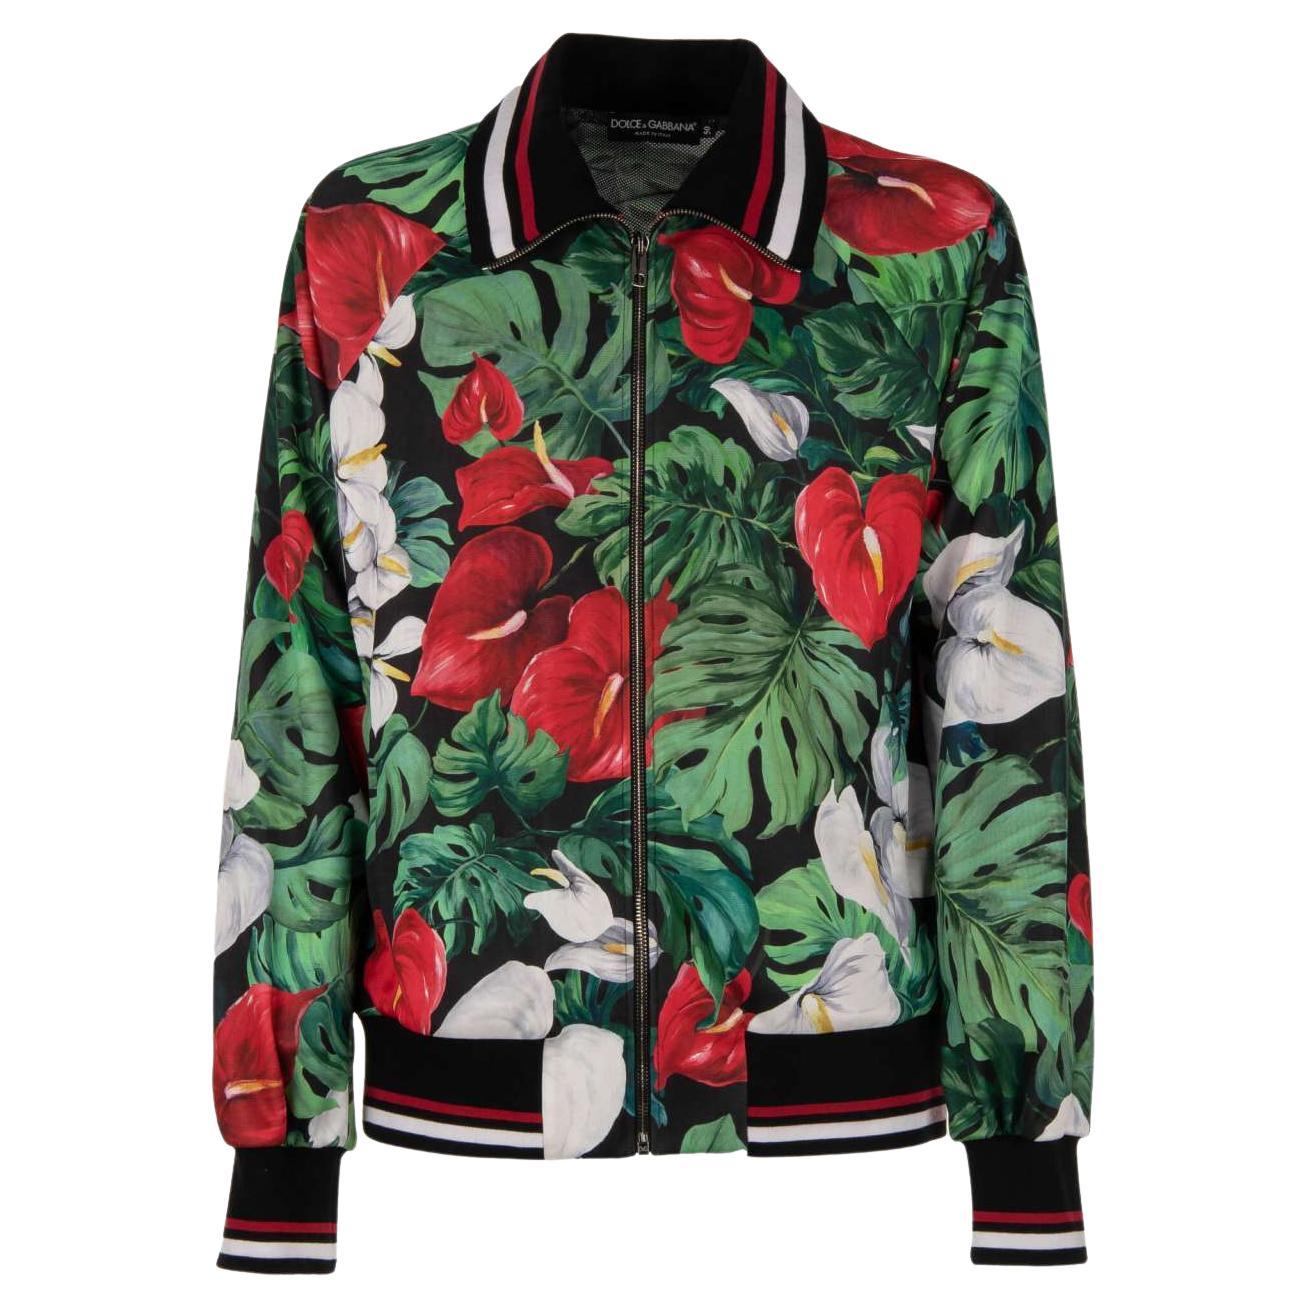 Dolce & Gabbana Floral Printed Track Jacket with Knit Details and Pockets 50 M-L